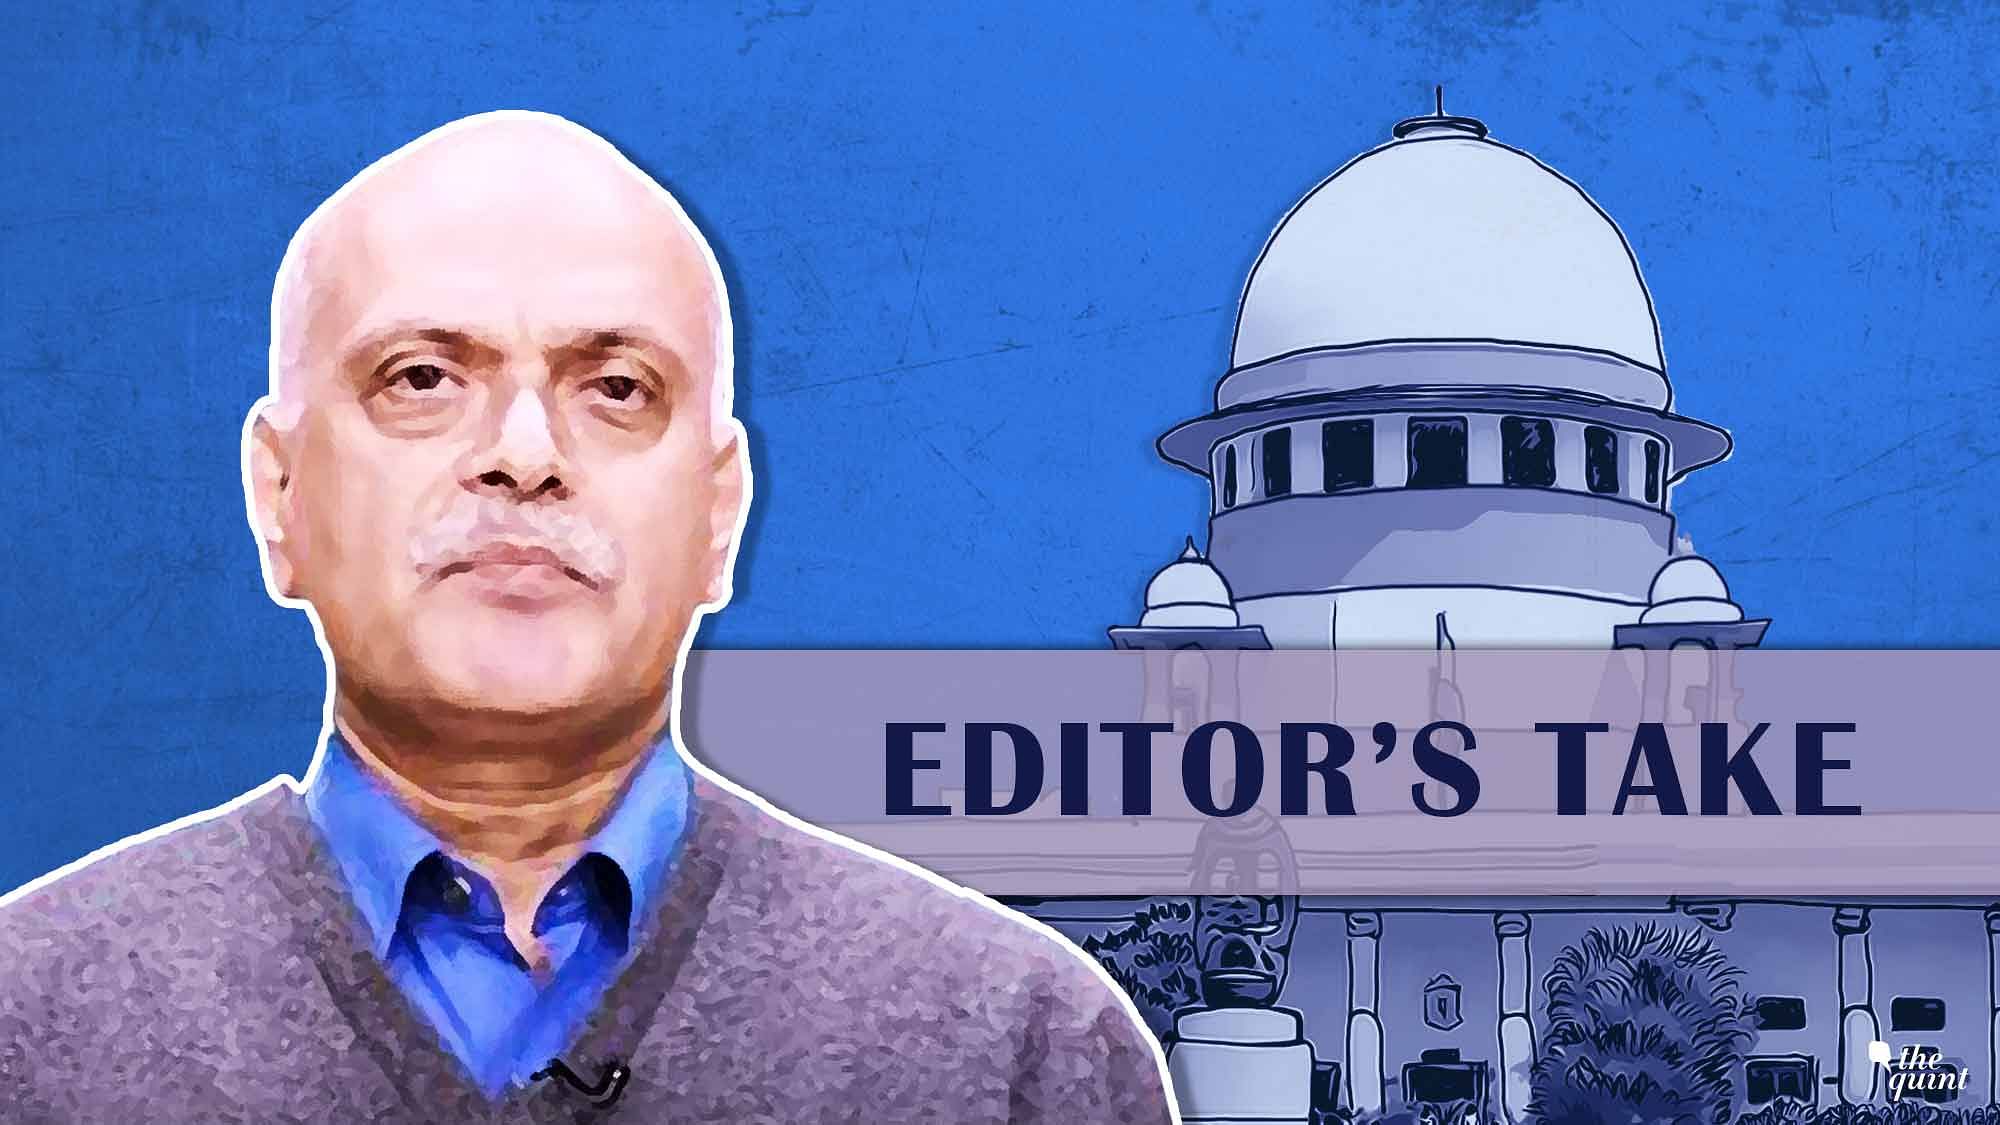 The Quint’s Editor-in-Chief Raghav Bahl on the recent divide between Supreme Court Judges.